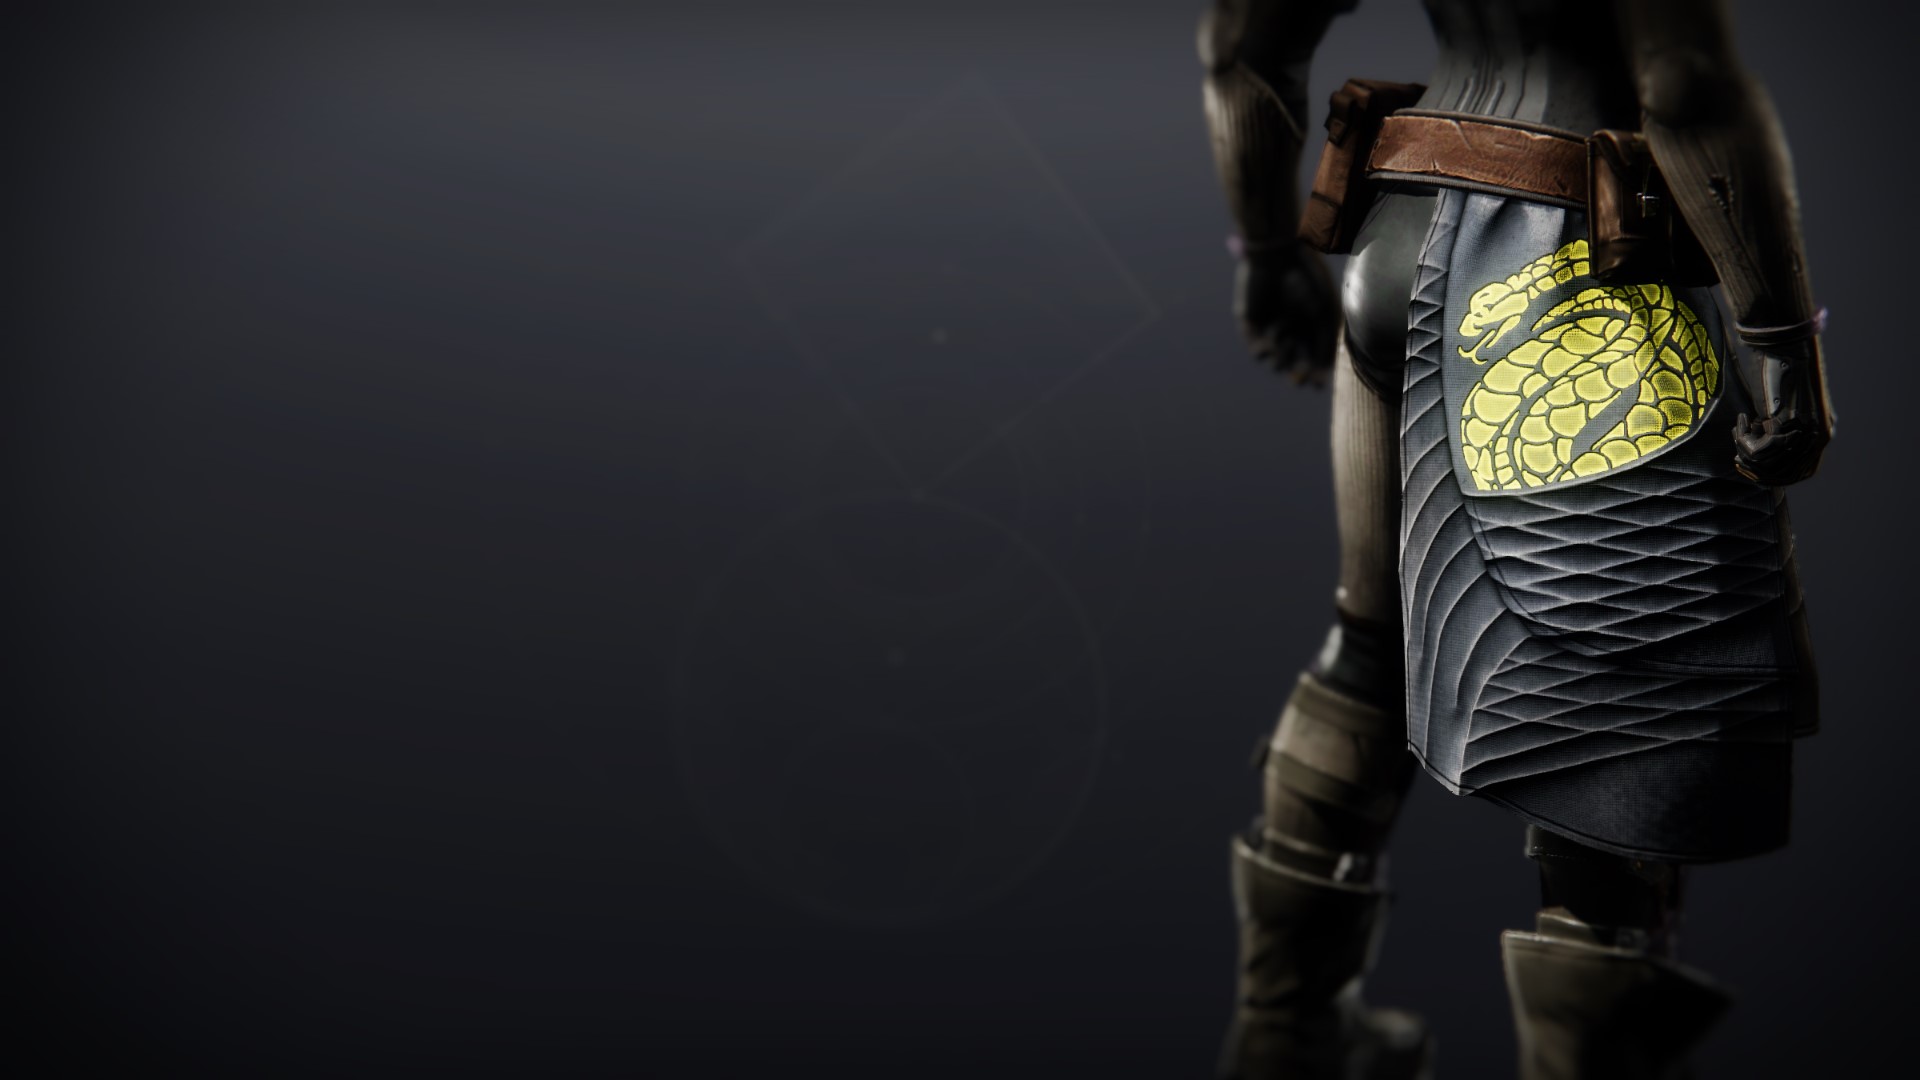 An in-game render of the Illicit Sentry Mark.